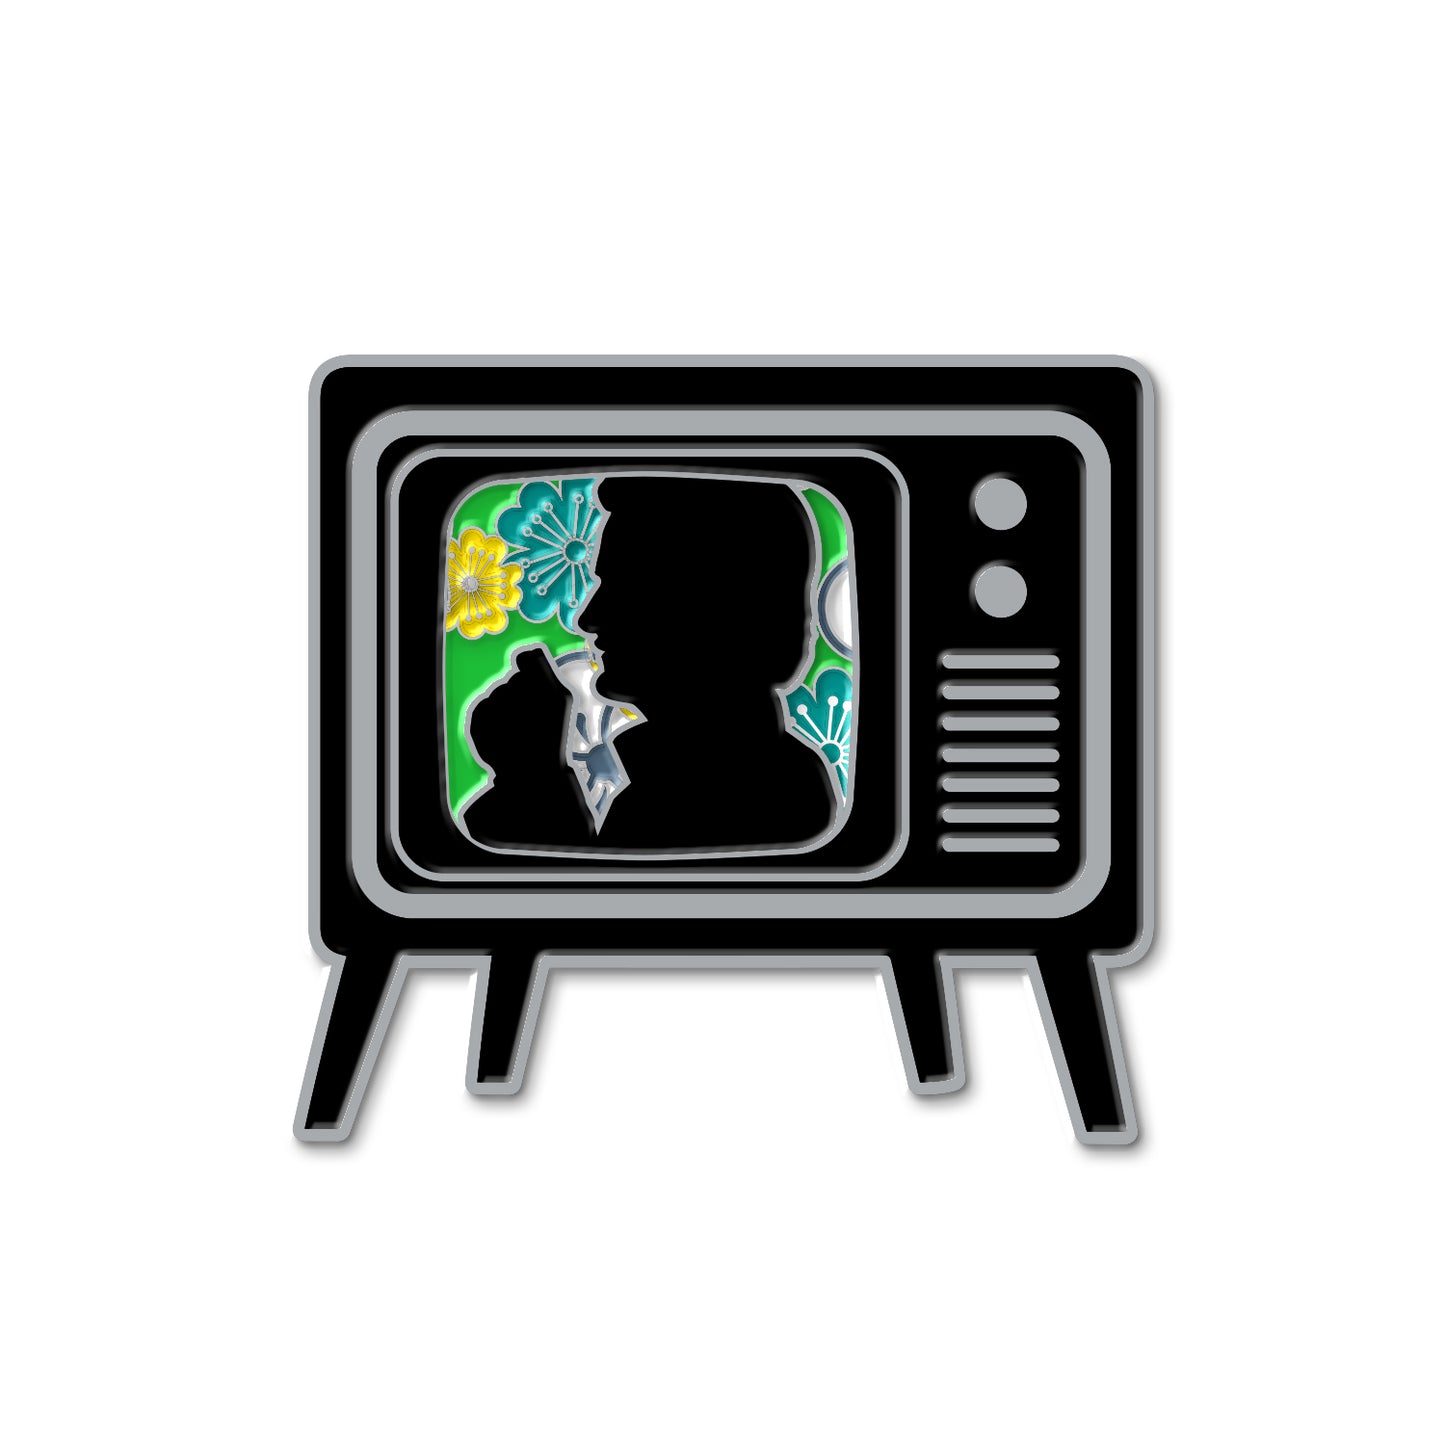 Load image into Gallery viewer, A brass pin in the shape of an old TV set, on a white background. On the screen is a black silhouette of the Trickster character from Supernatural, surrounded by green and yellow flowers.
